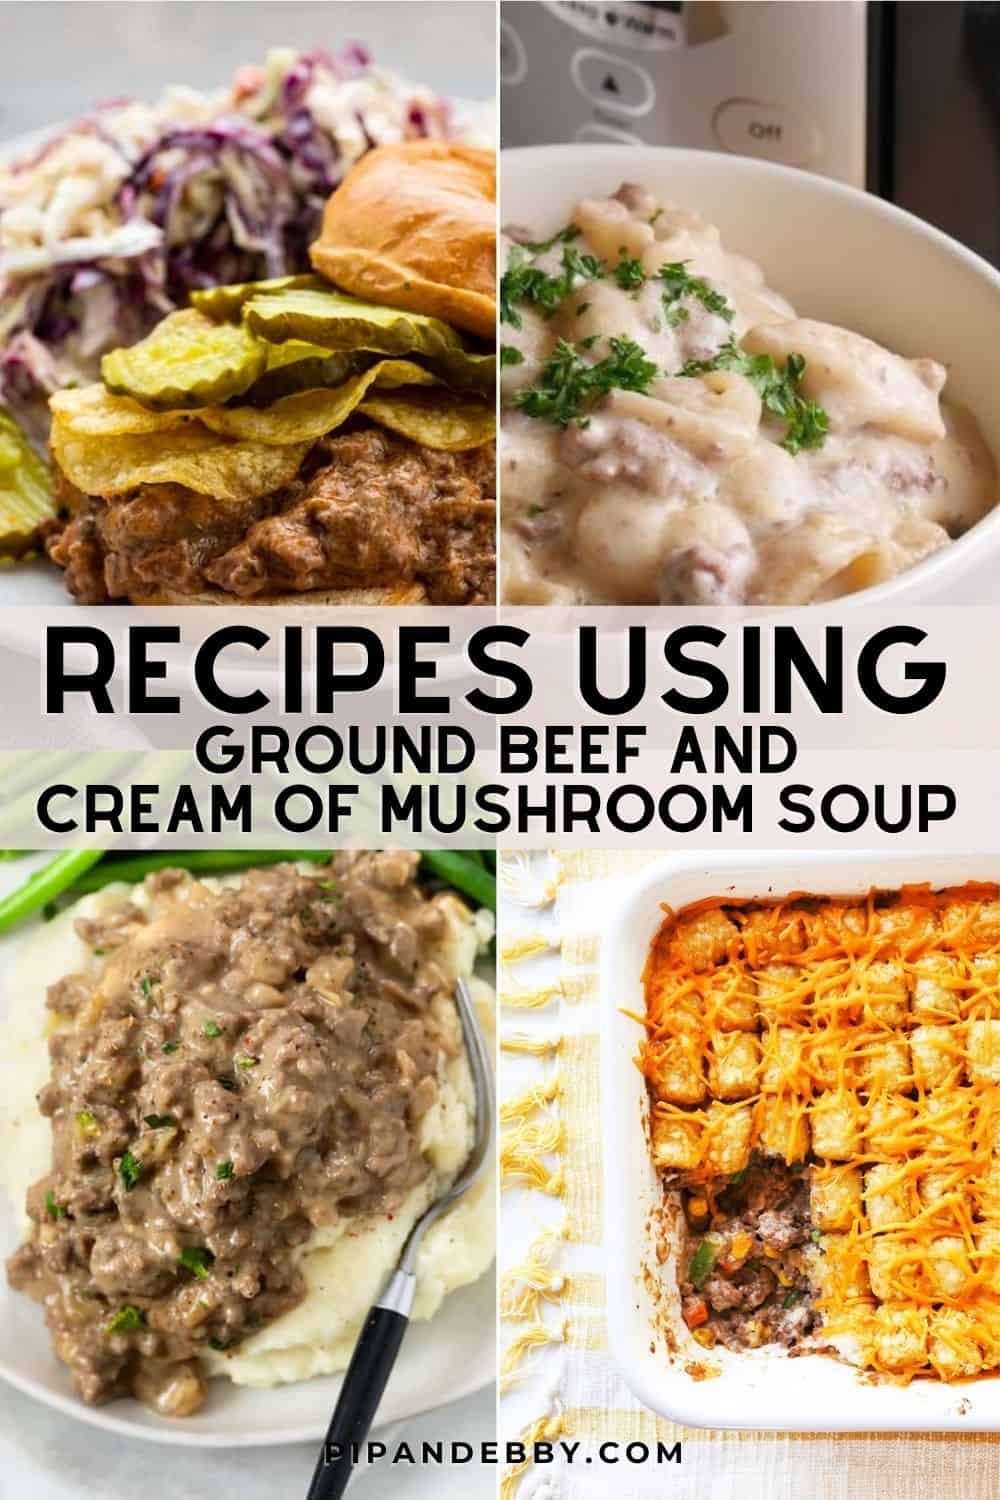 Grid of four food images with text overlay reading, "Recipes using ground beef and cream of mushroom soup."